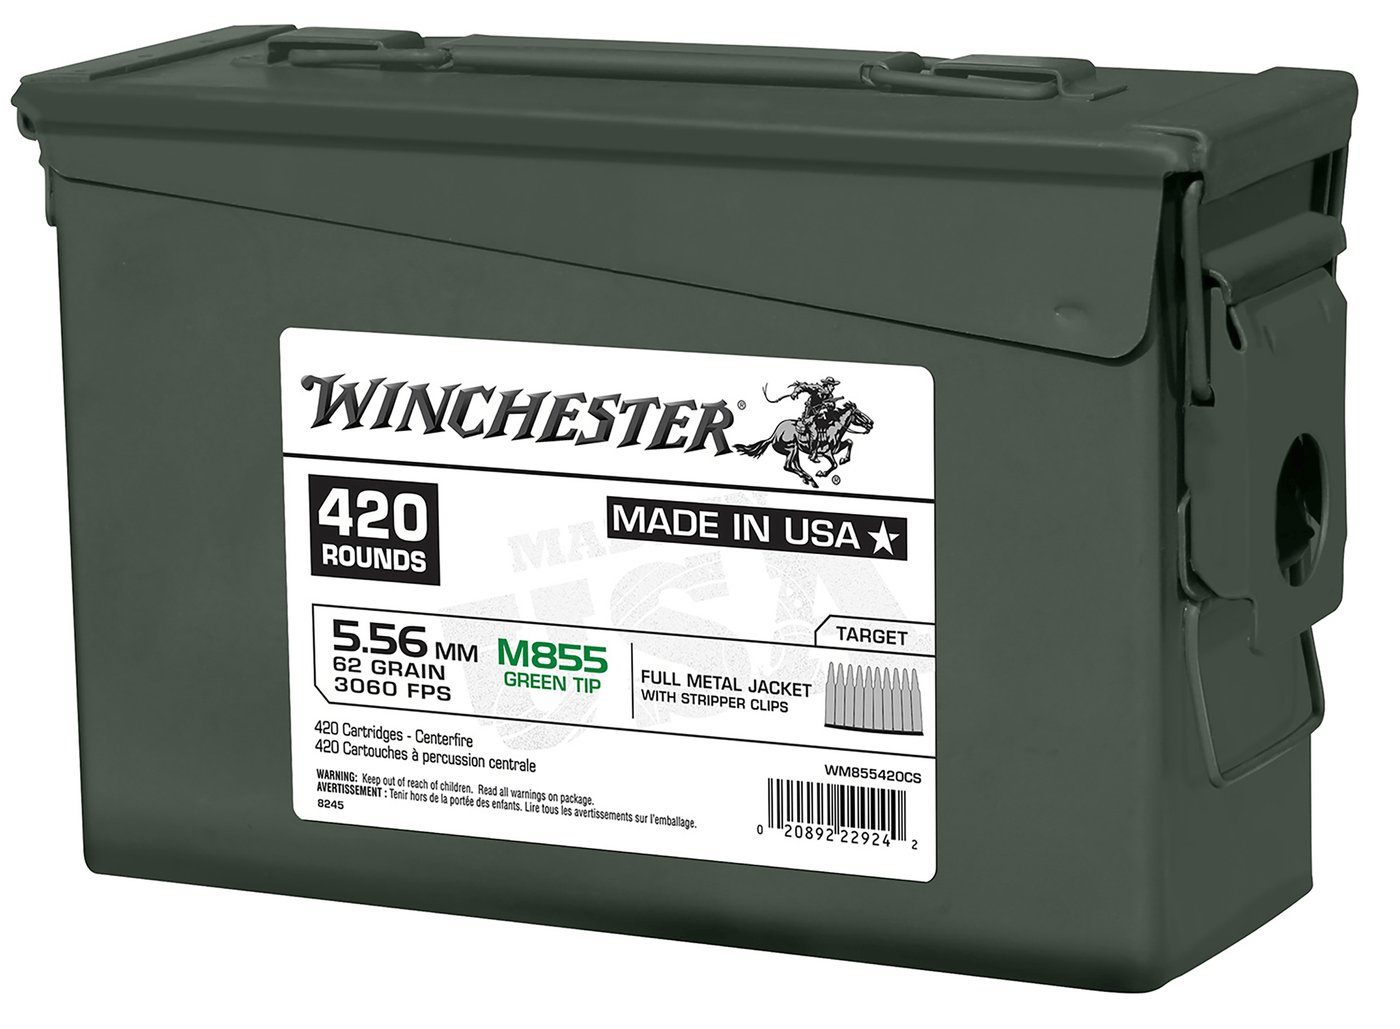 Winchester Ammo Winchester Usa Rifle Ammo 5.56mm 62 Gr. Fmj 420 Rd. Green Tip Ammo